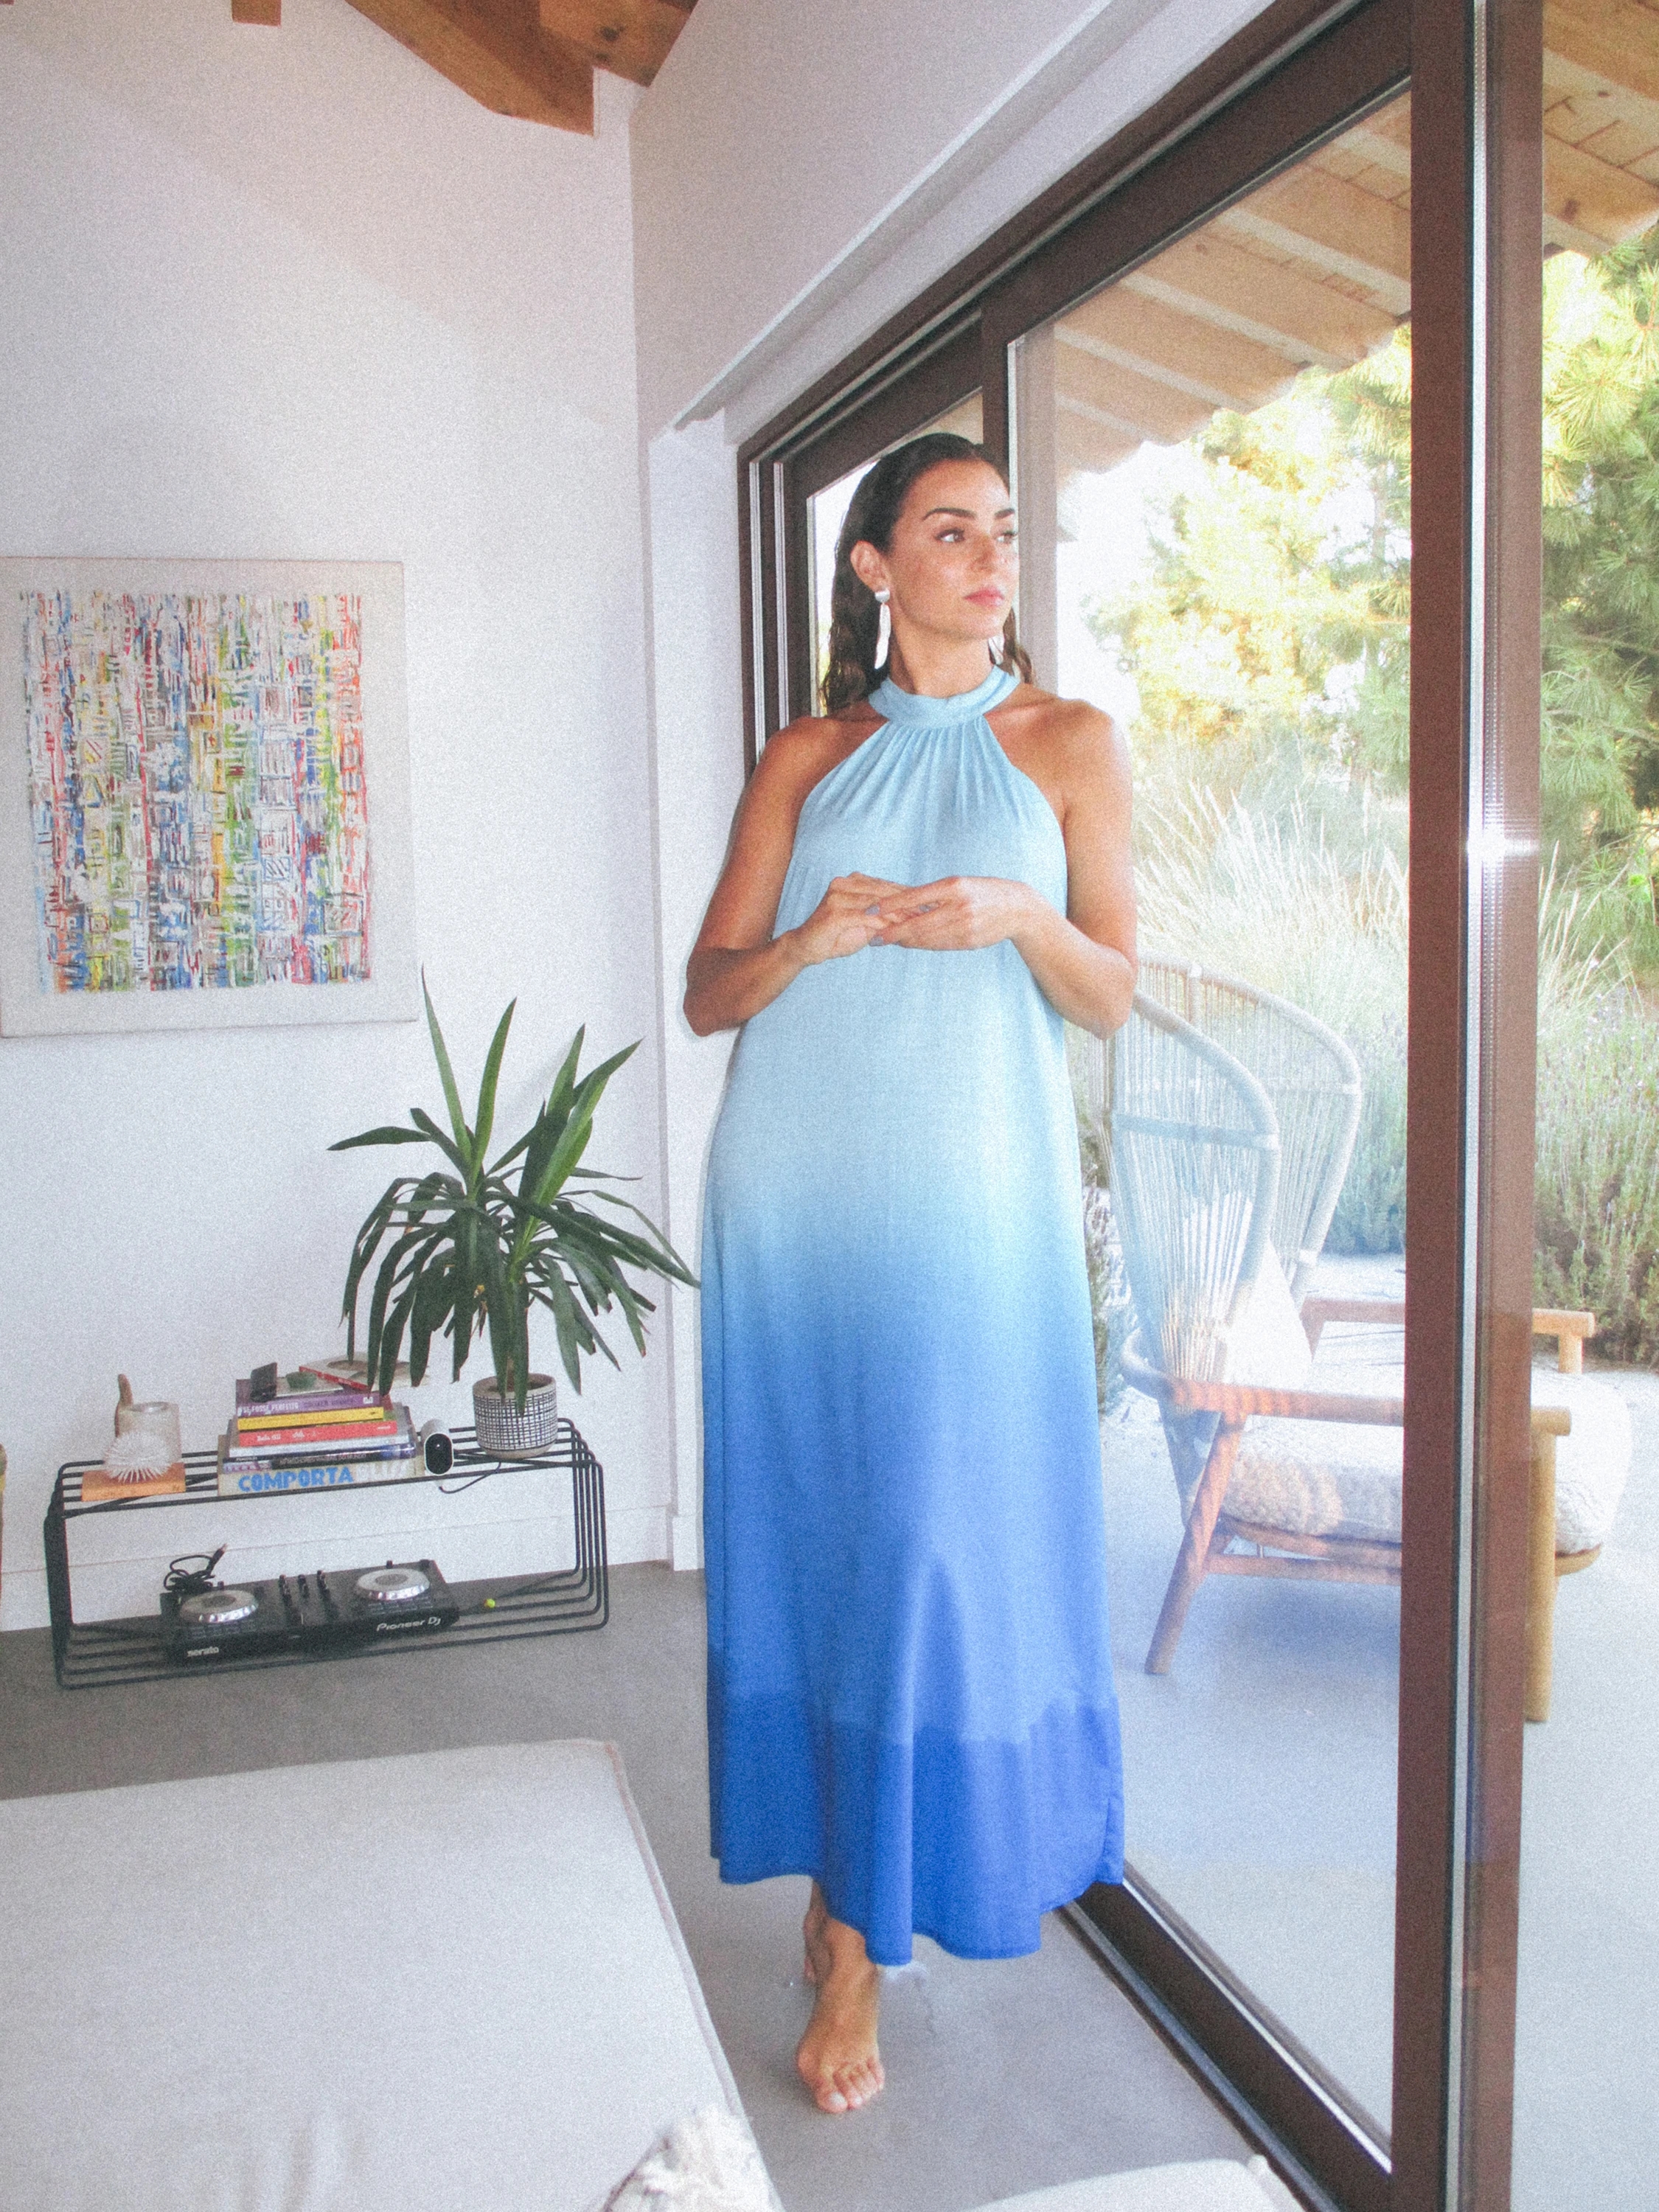 Vanessa Martins shines in her own creation, presenting a mesmerizing capsule collection of long gradient dresses that redefine warmth, style, and grace.